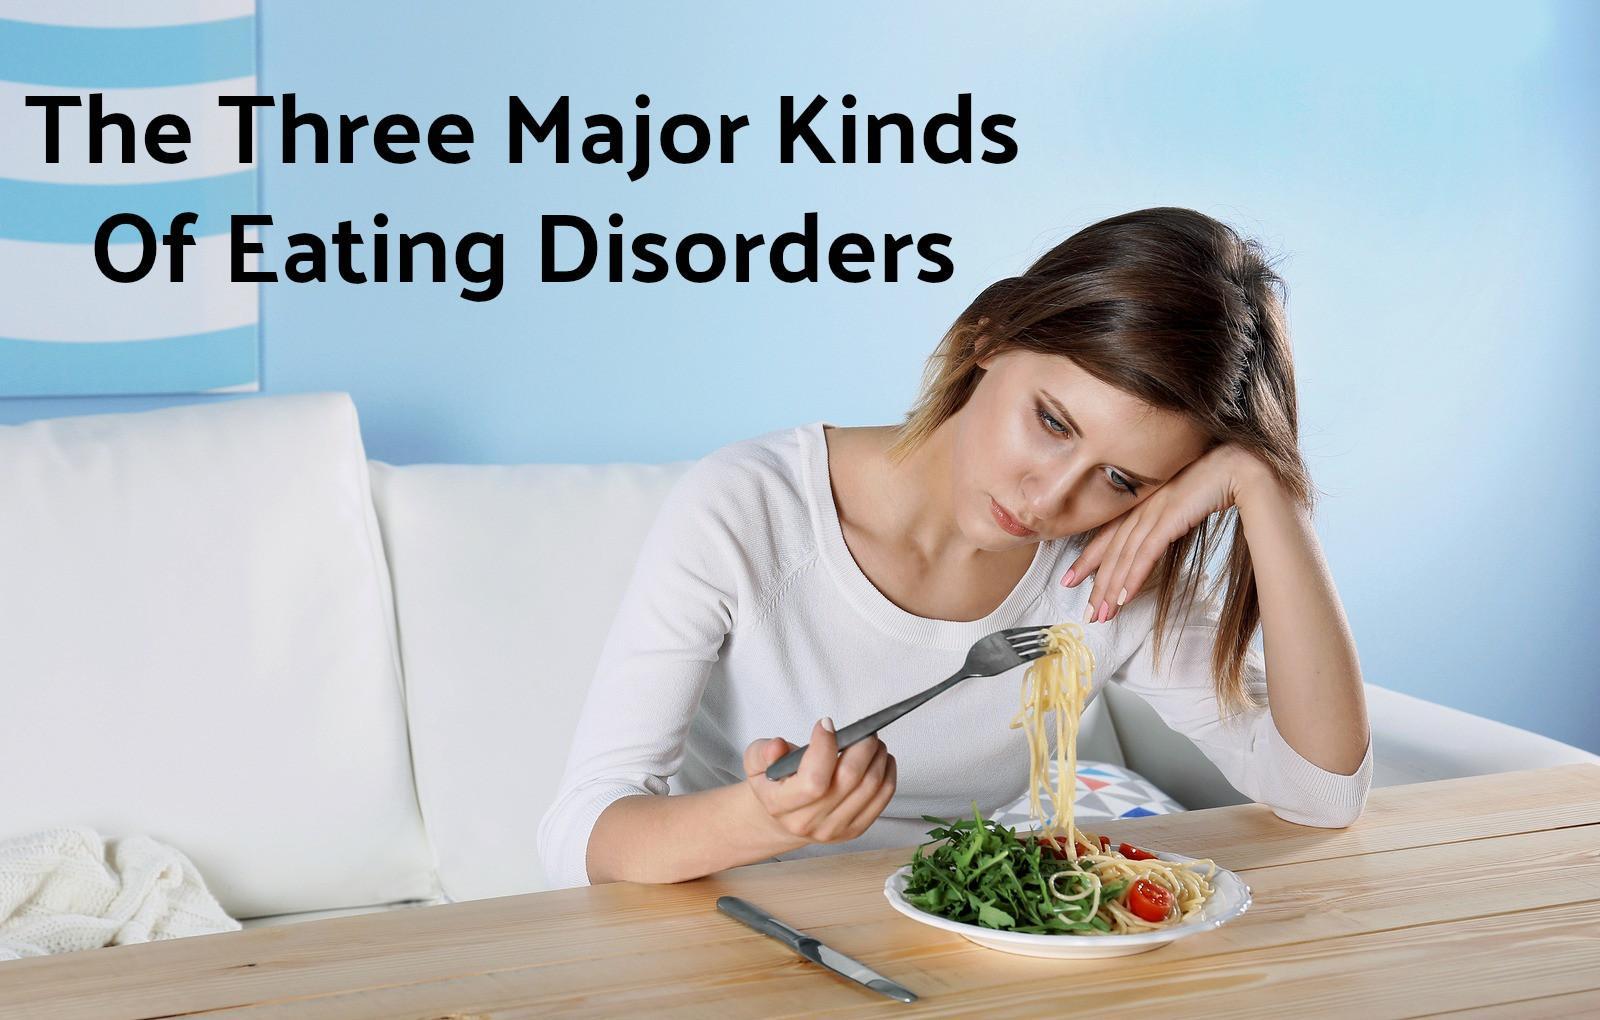 The Three Major Kinds of Eating Disorders